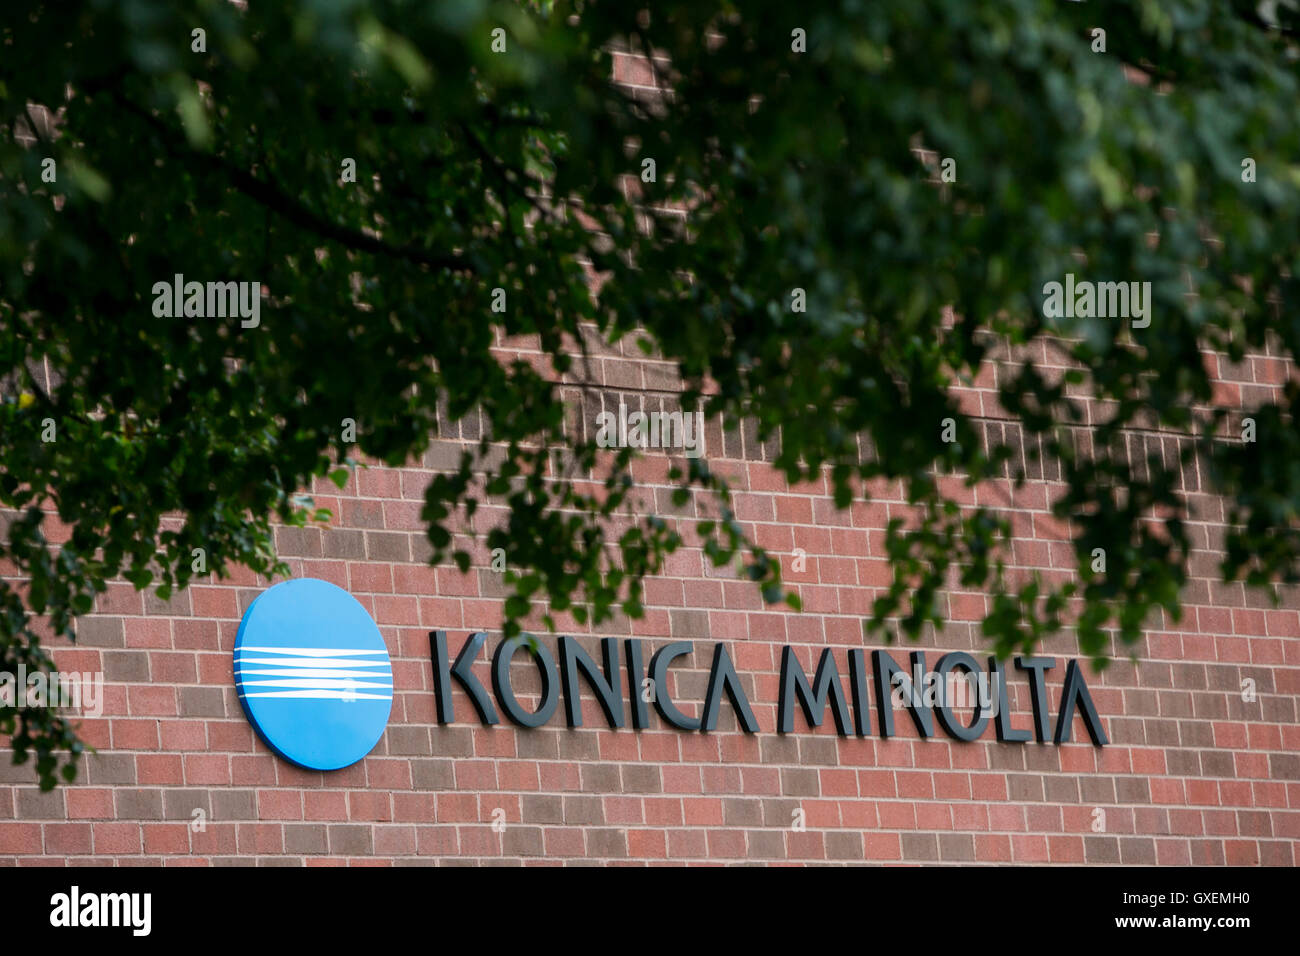 A logo sign outside of a facility occupied by Konica Minolta, Inc., in Wilmington, Massachusetts on August 13, 2016. Stock Photo